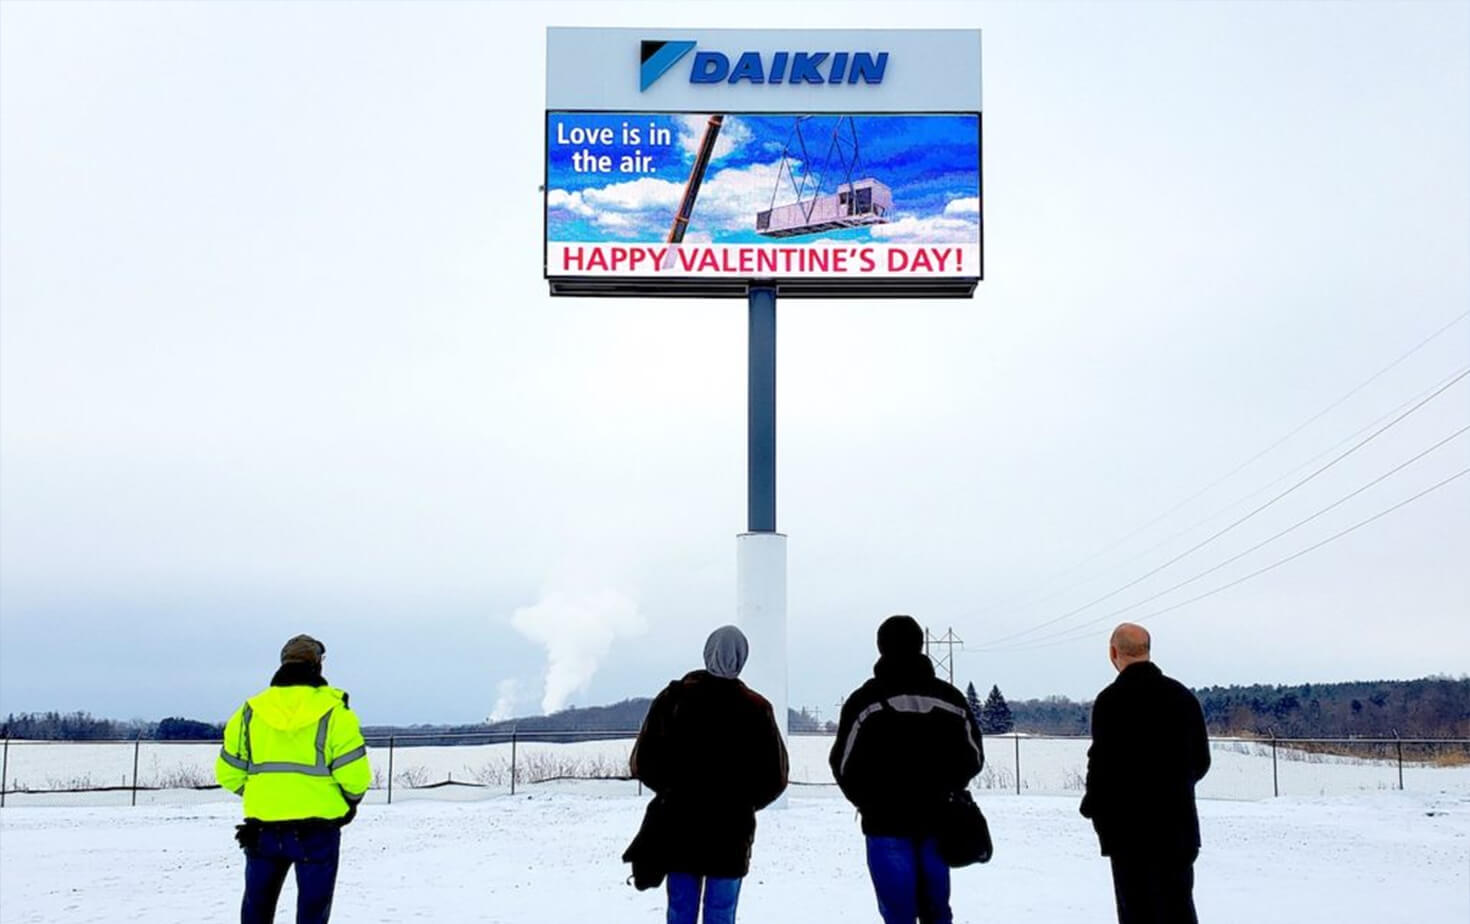 Dakin Applied Americas Fairbault MN Pylon Sign with people in foreground